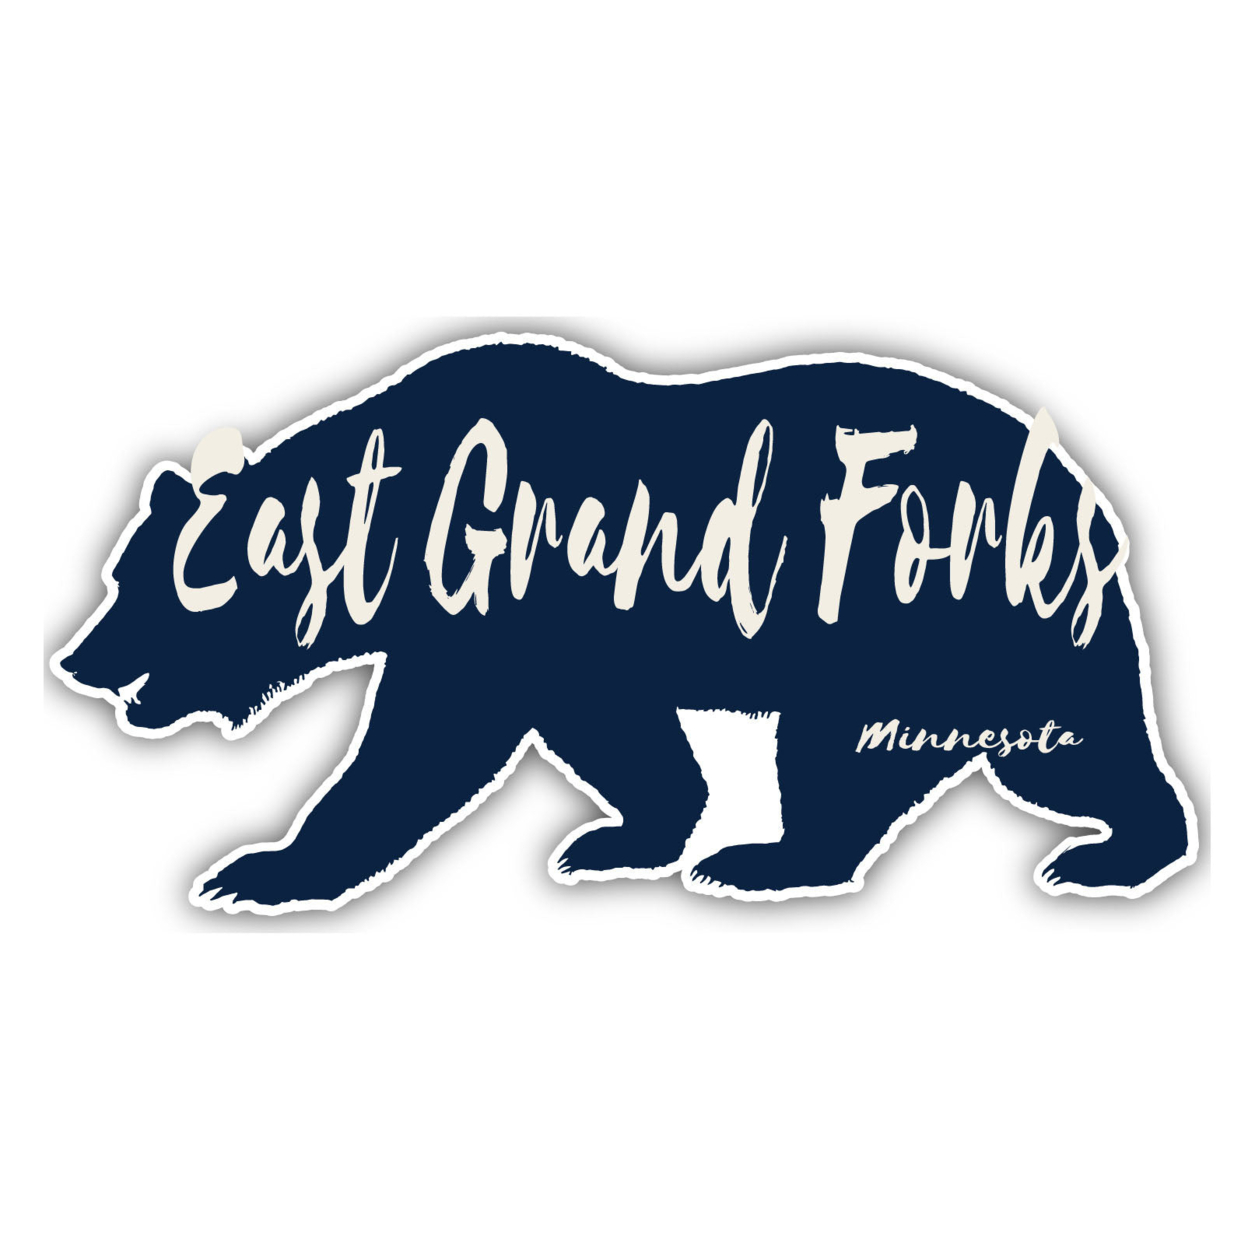 East Grand Forks Minnesota Souvenir Decorative Stickers (Choose Theme And Size) - 4-Pack, 12-Inch, Tent